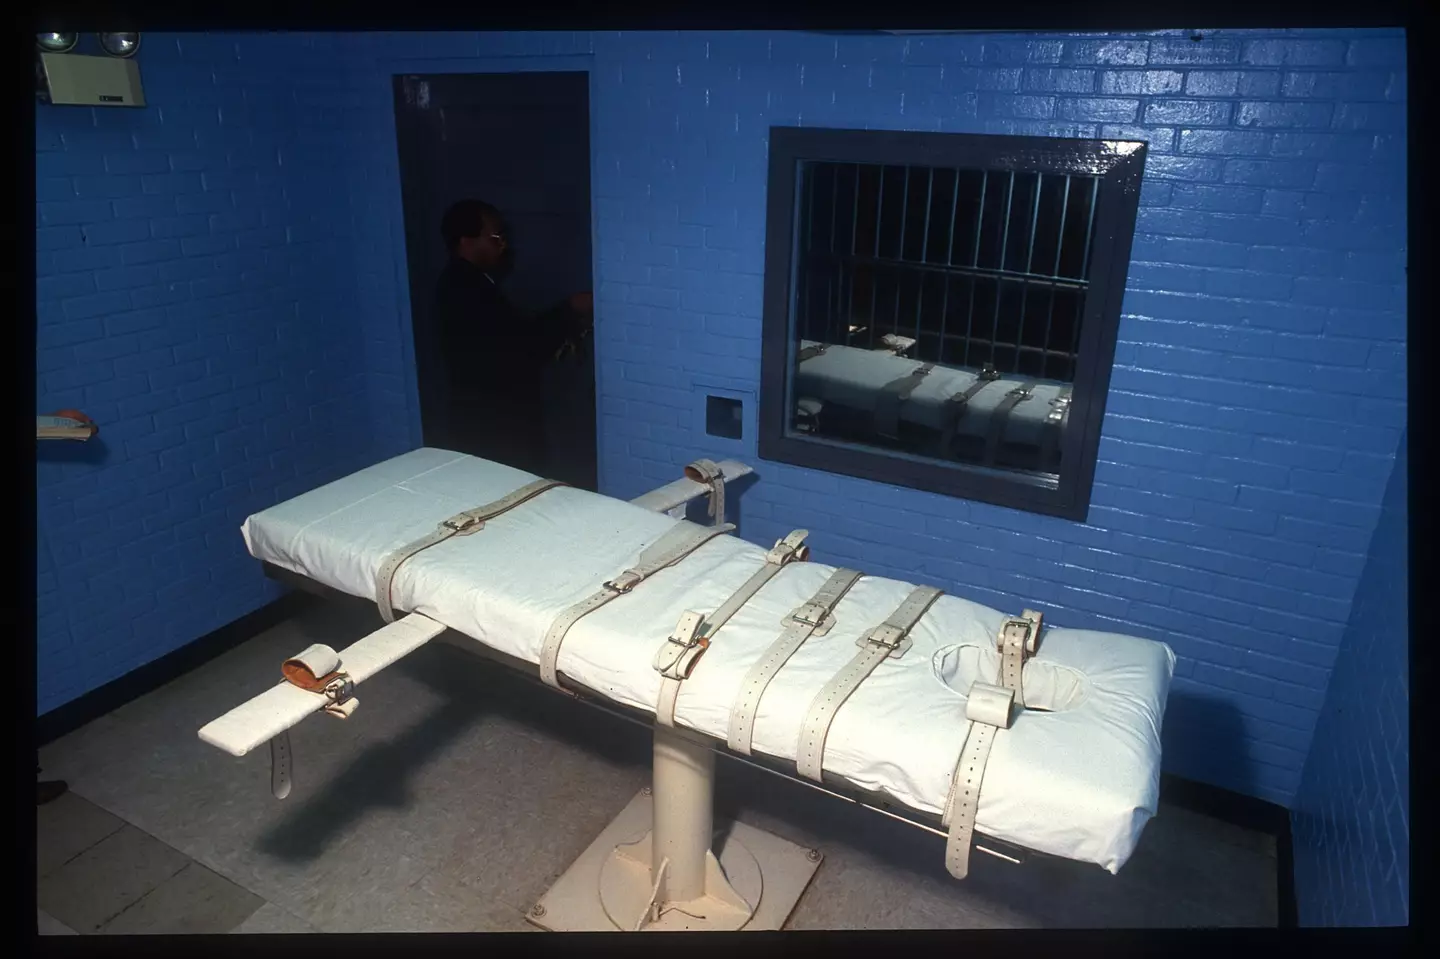 The 'death chamber' for lethal injection at a Texas prison.